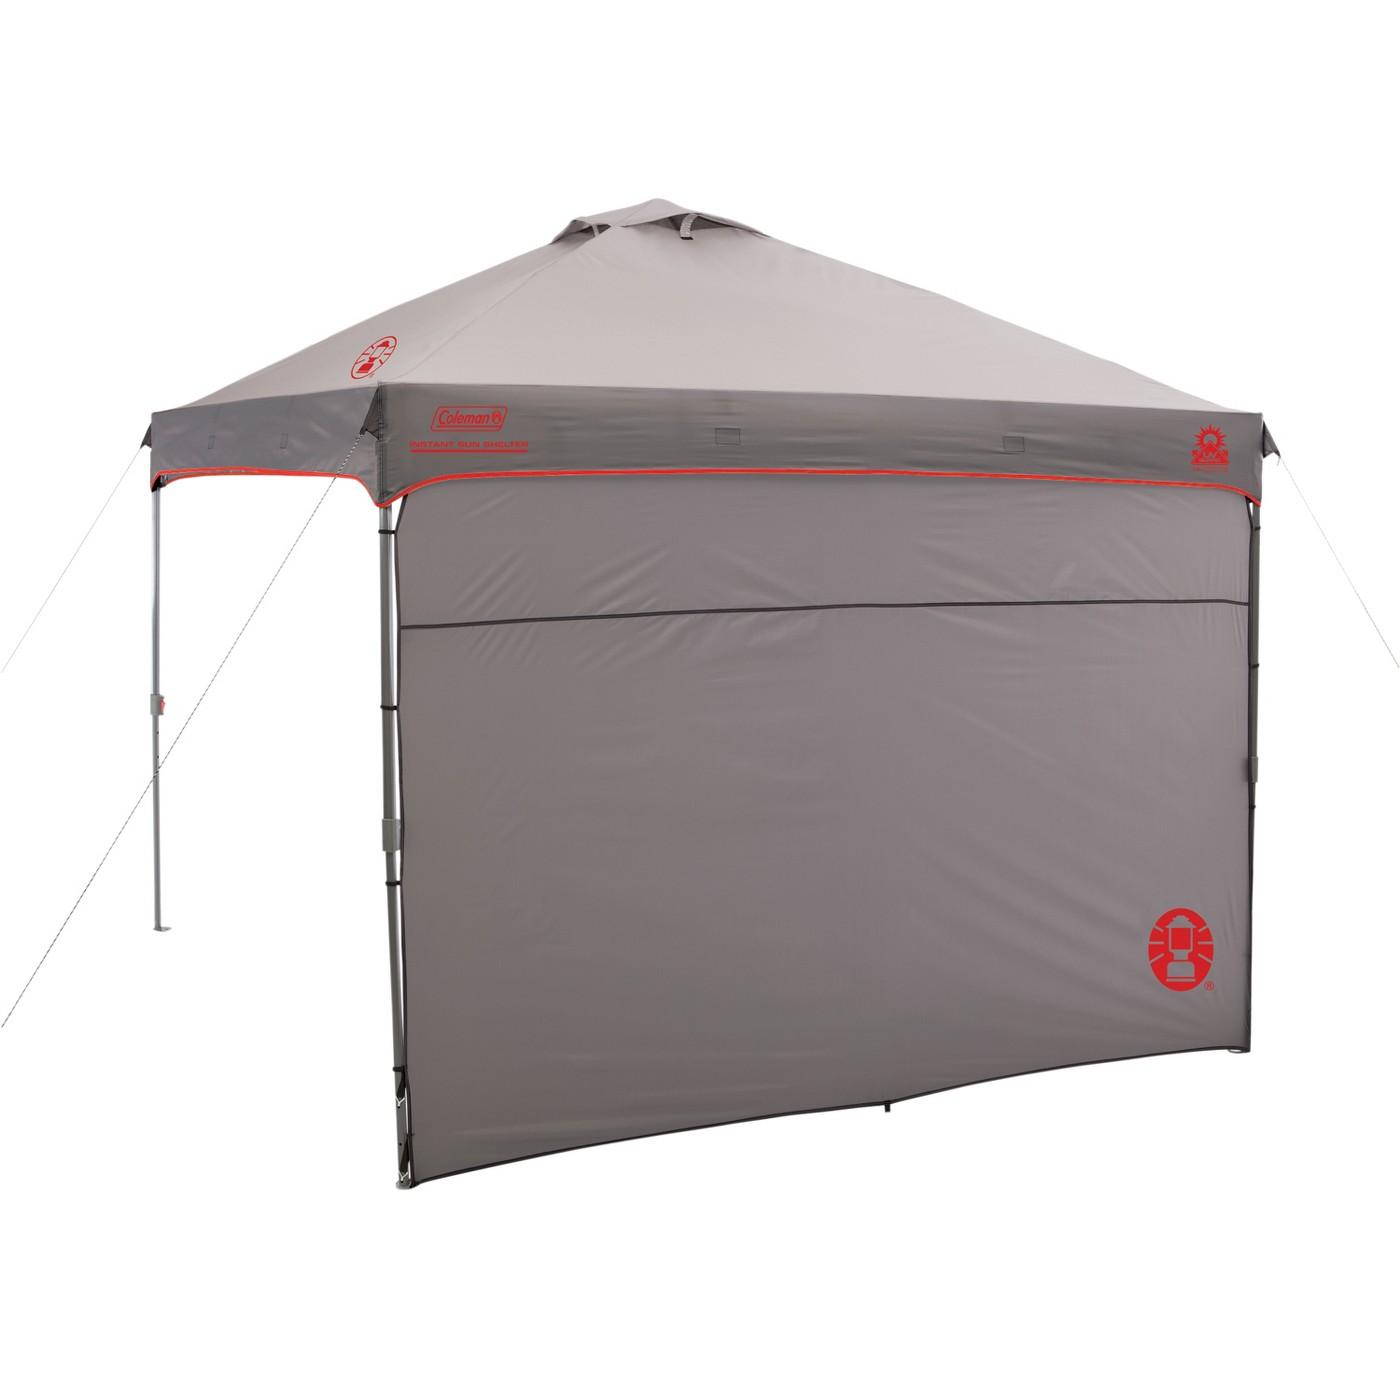 Coleman 10x10 Instant Canopy with Sunwall for $74.99 Shipped